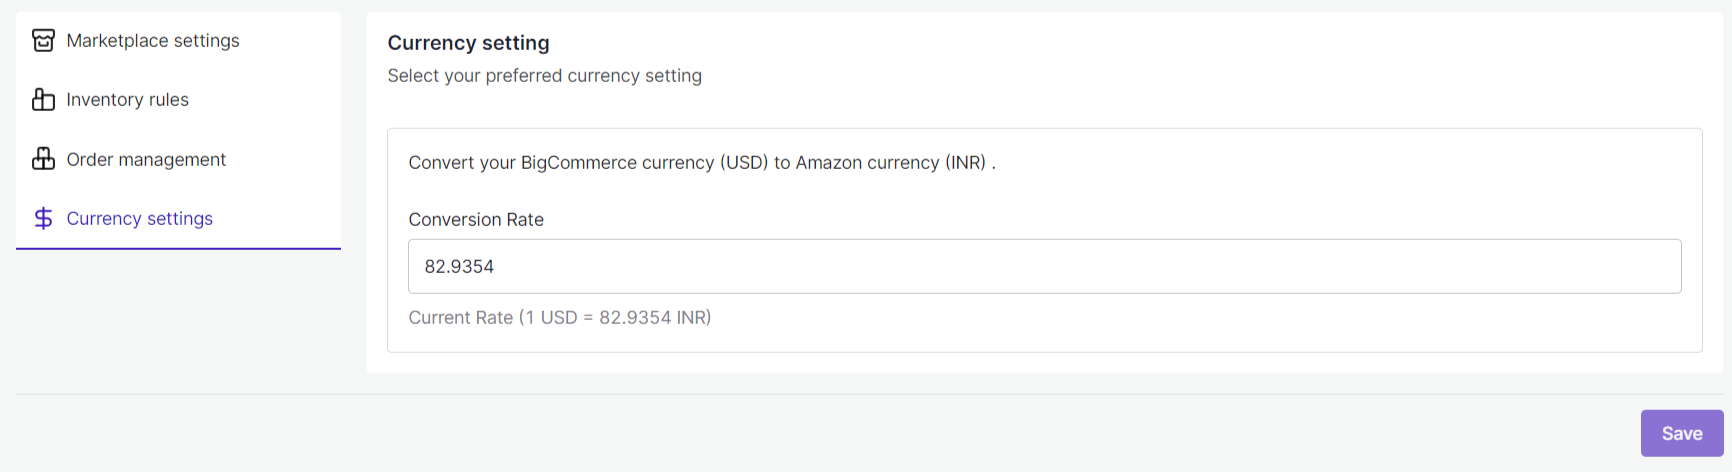 Currency settings